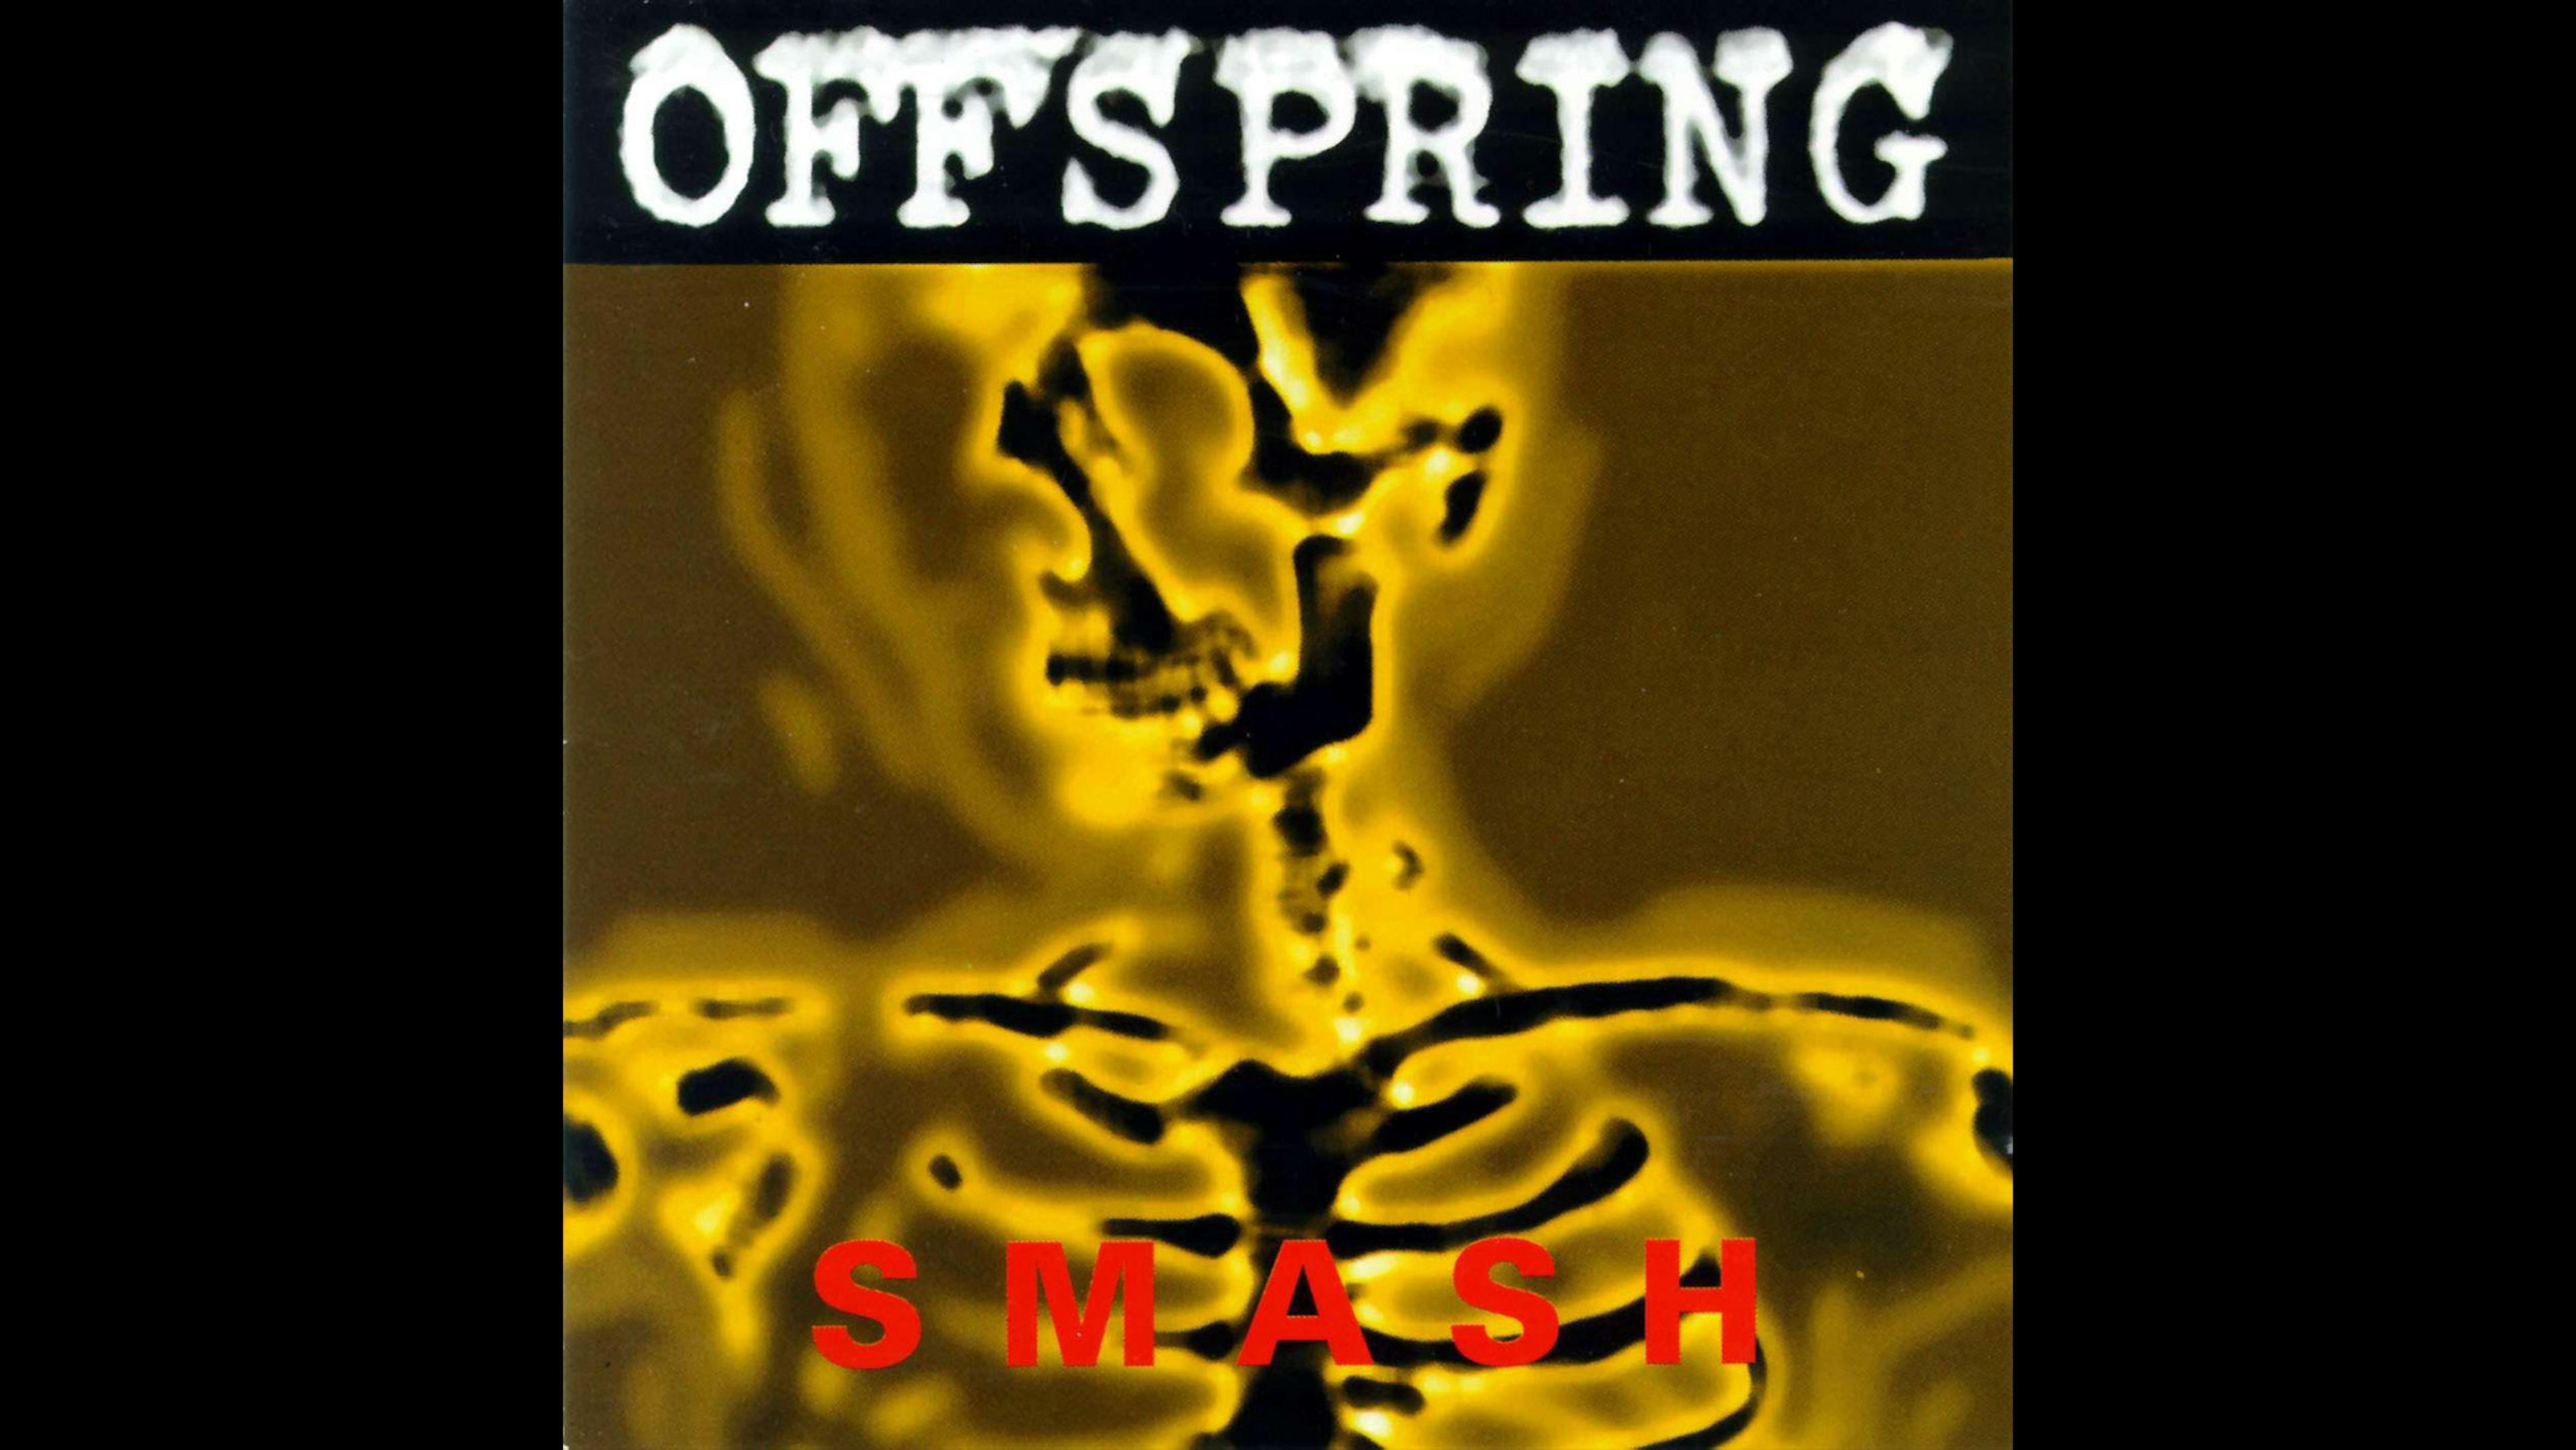 Alongside Green Day’s Dookie, Smash was perhaps the most important album in terms of introducing punk to the masses. It sold millions upon millions thanks to singles like Come Out And Play and Self Esteem. Its best moment, though? Nitro (Youth Energy) – a ludicrous song about road rage featuring the immortal insult ‘You stupid dumb shit goddamn MOTHERFUCKER!’, which captured the spirit of early pop-punk perfectly.